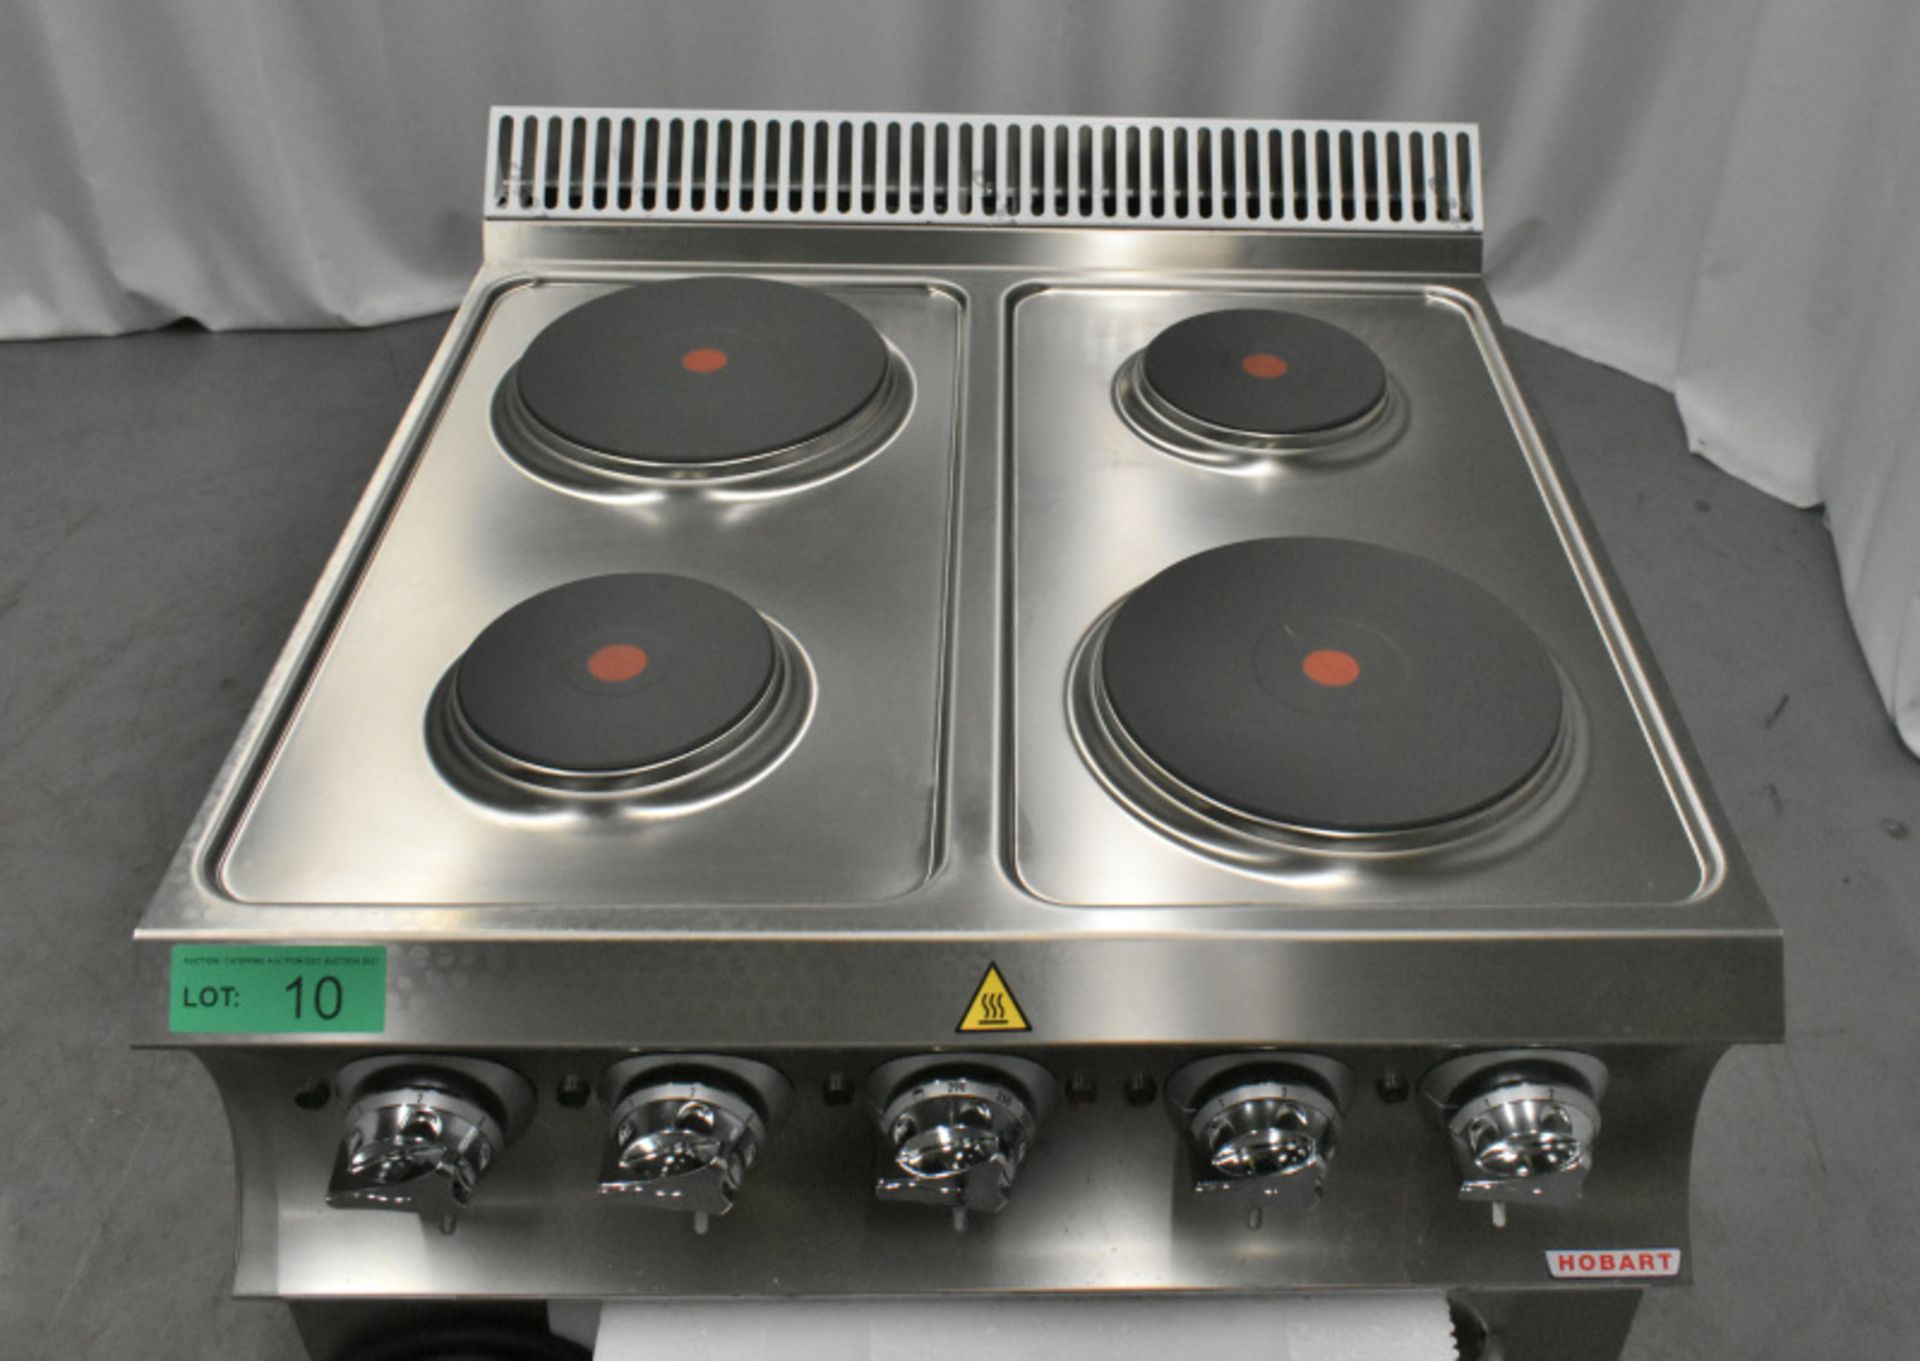 Hobart Electric Range Oven with 4 Plate top - Model HCSE4F77 - Image 2 of 8